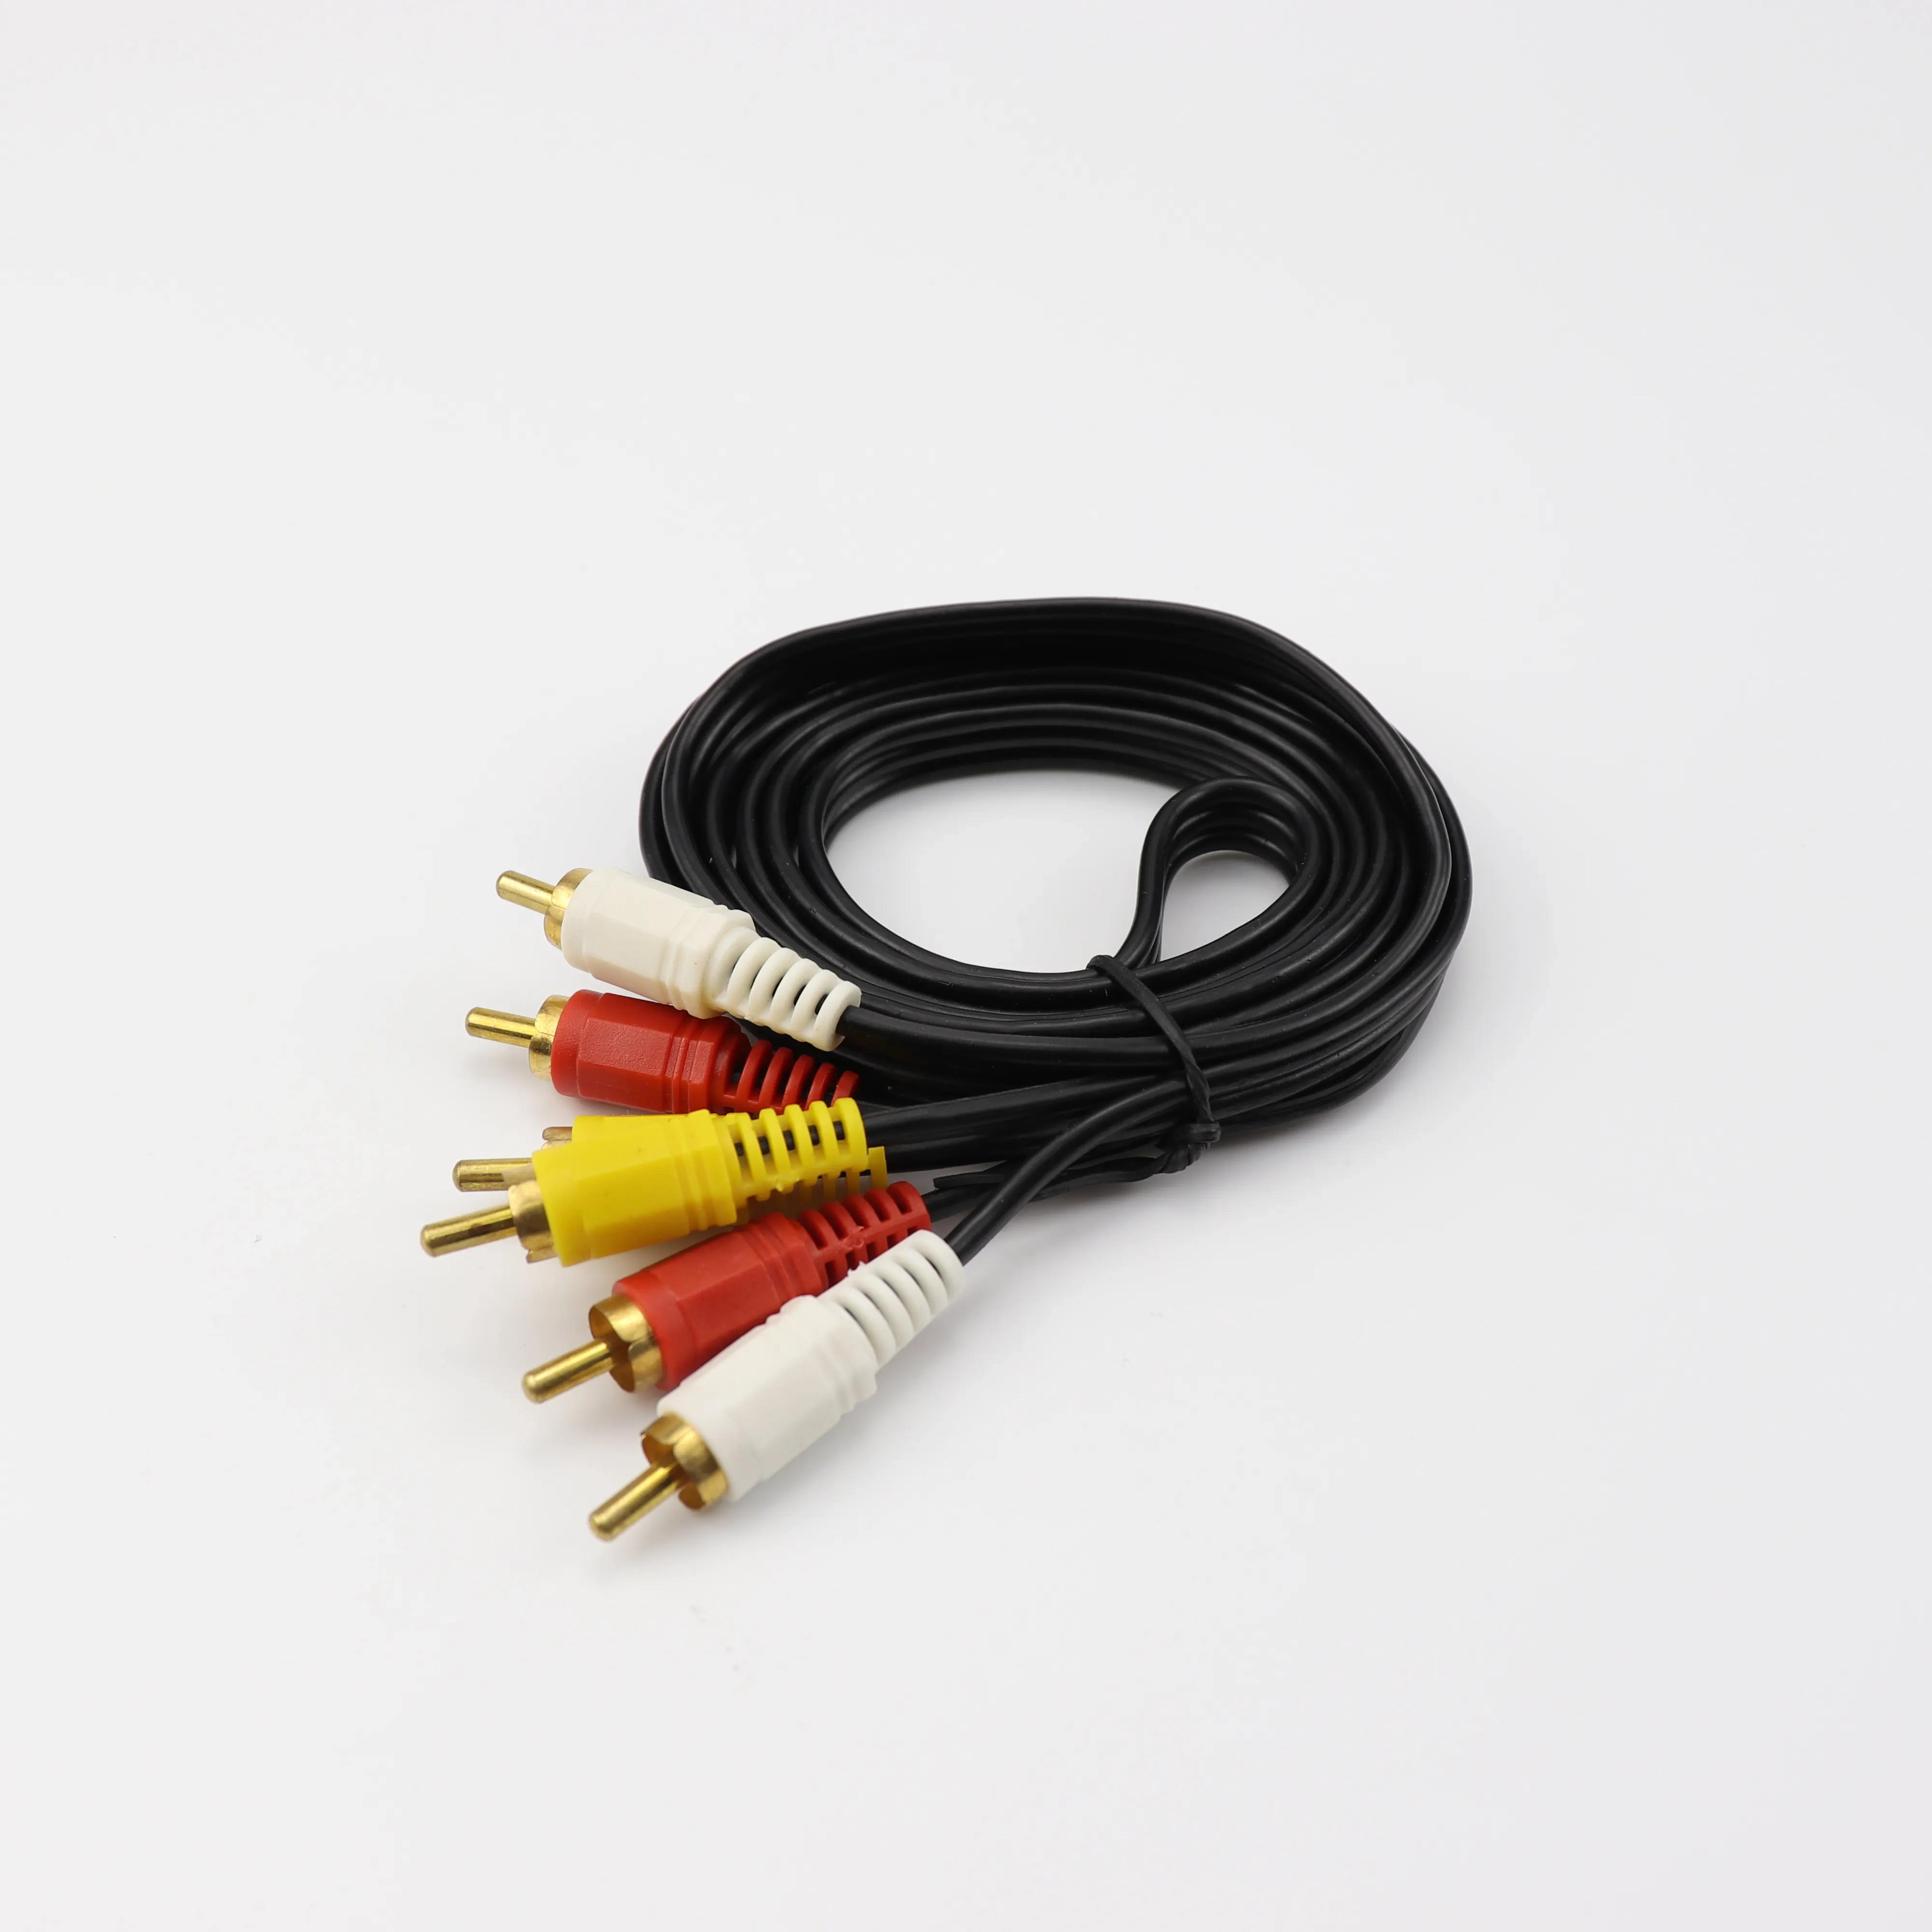 Gold Plated 3 Rca Male to 3 Rca Male Audio Video Extension Cable 3RCA Audio Cable